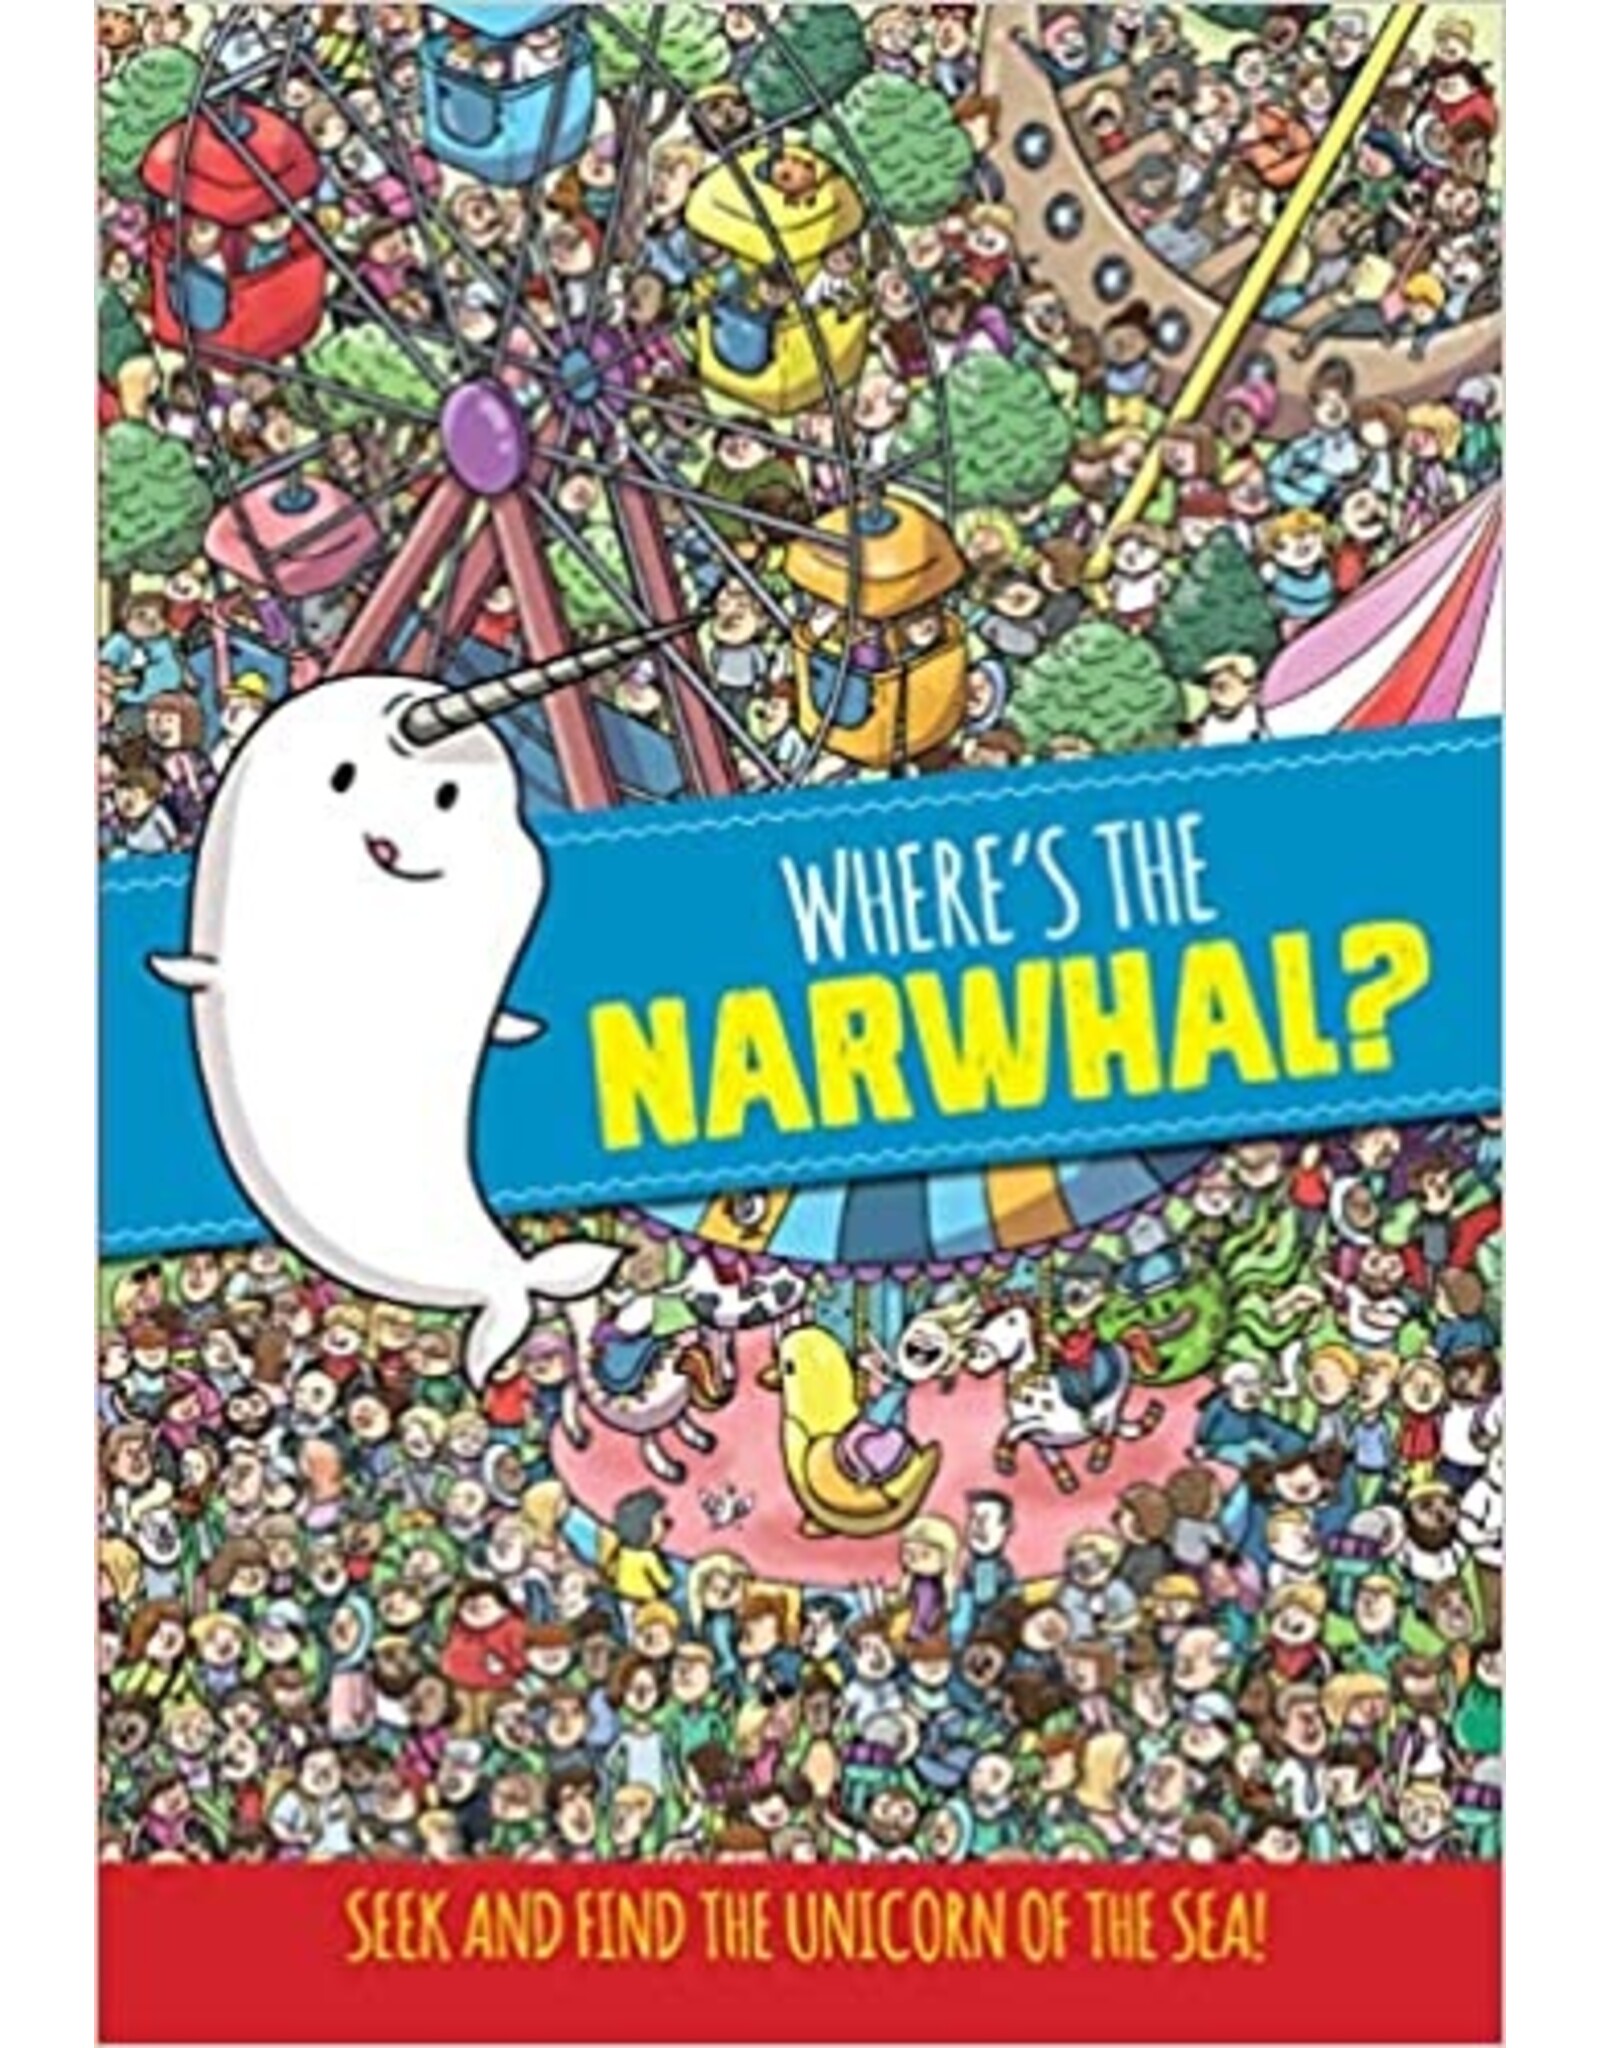 Where's The Narwhal - seek and find